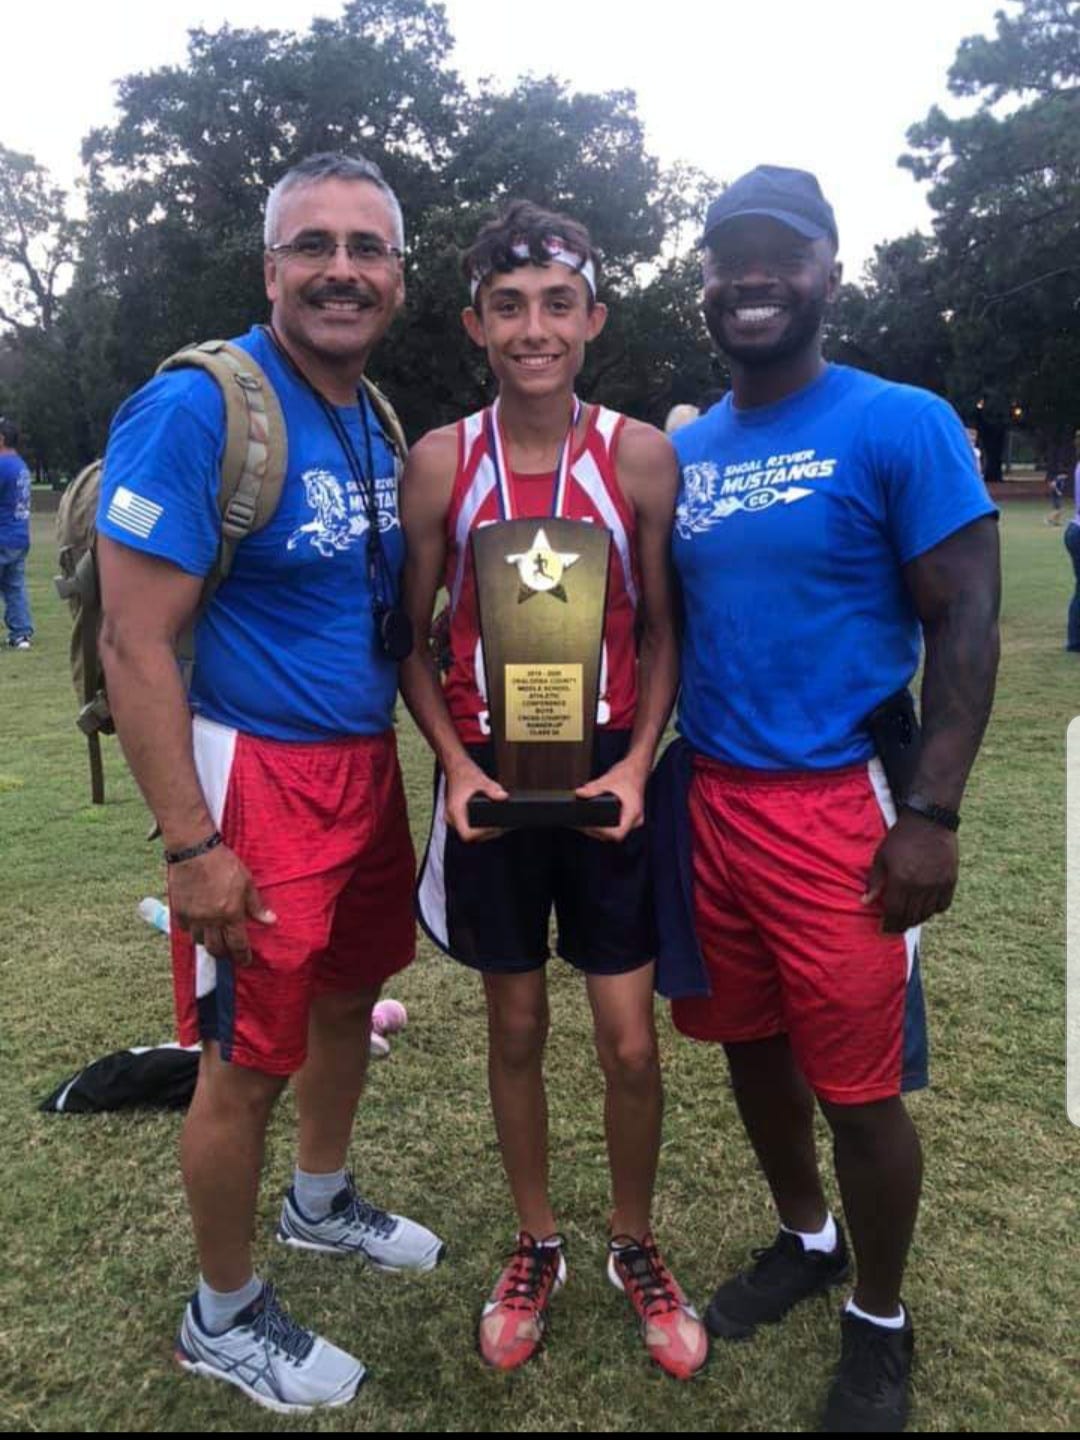 Alex Buena (middle) poses with his coaches, Enrique Torres (left) and Fernando Faust (right) after placing first in the county championship meet.